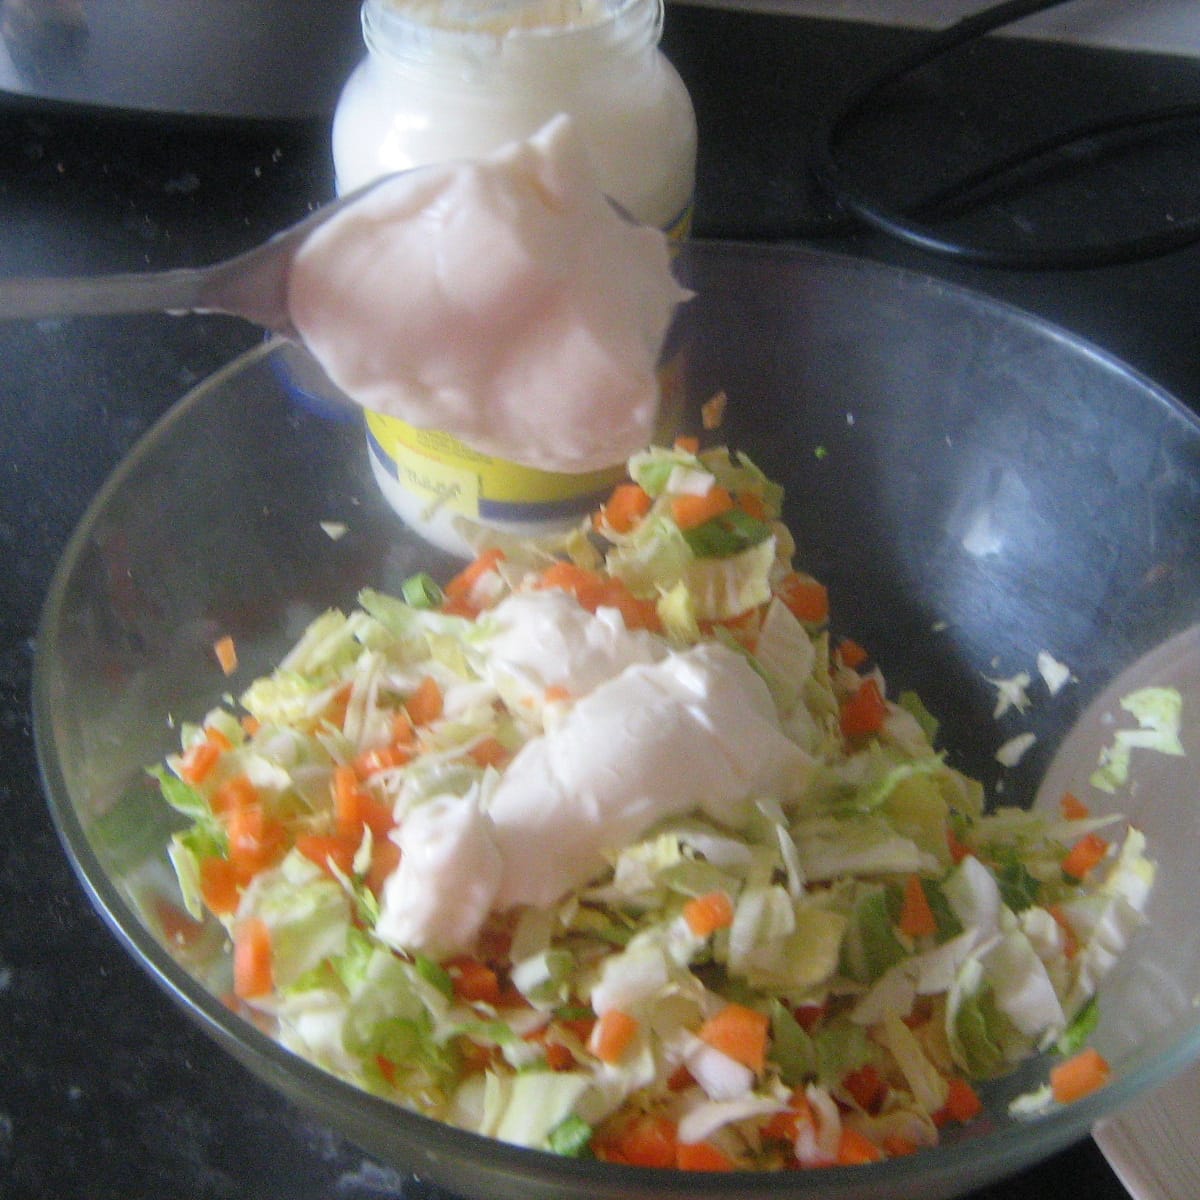 coleslaw dressing recipe with mayo